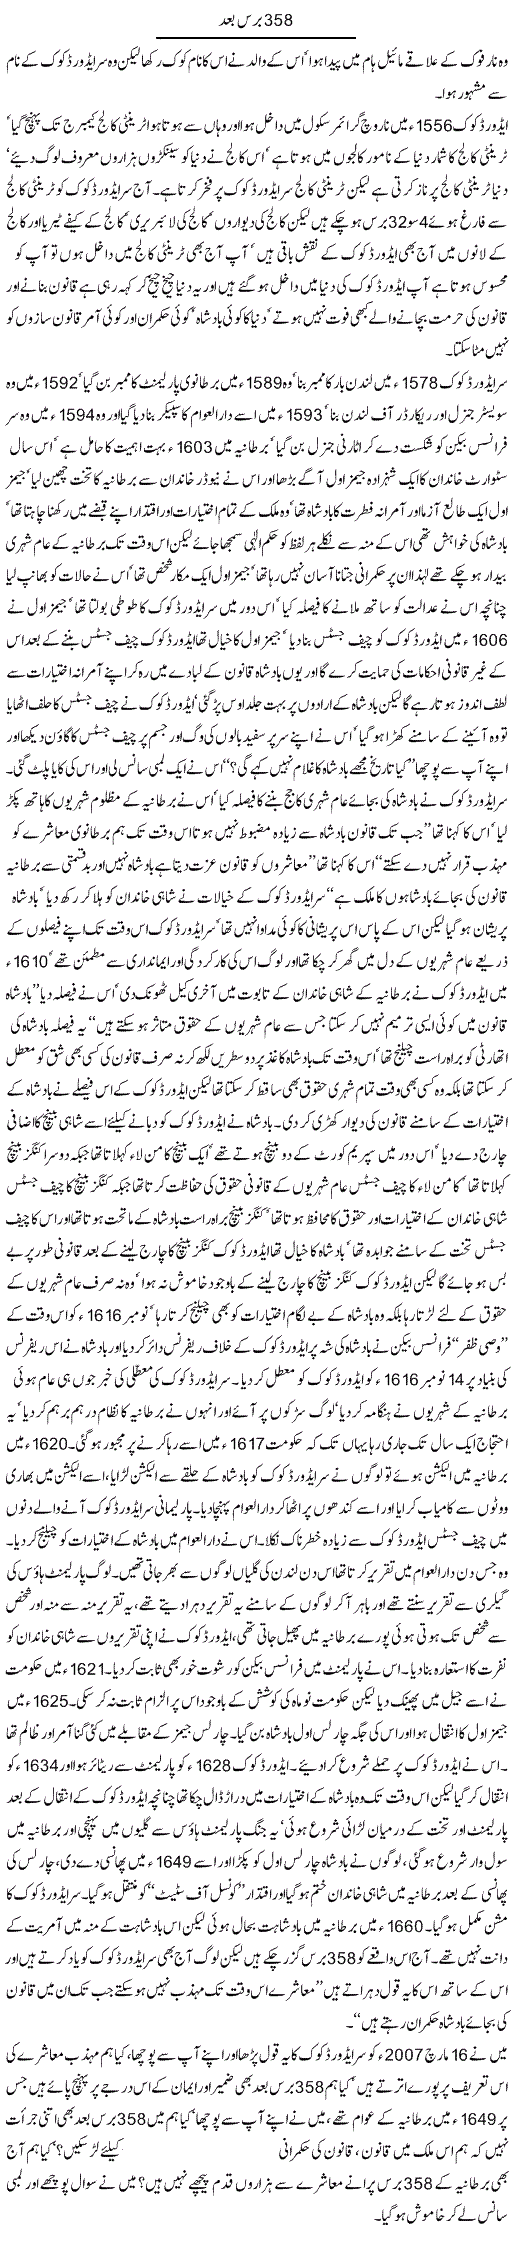 358 Baras Bad by Javed Chaudhry